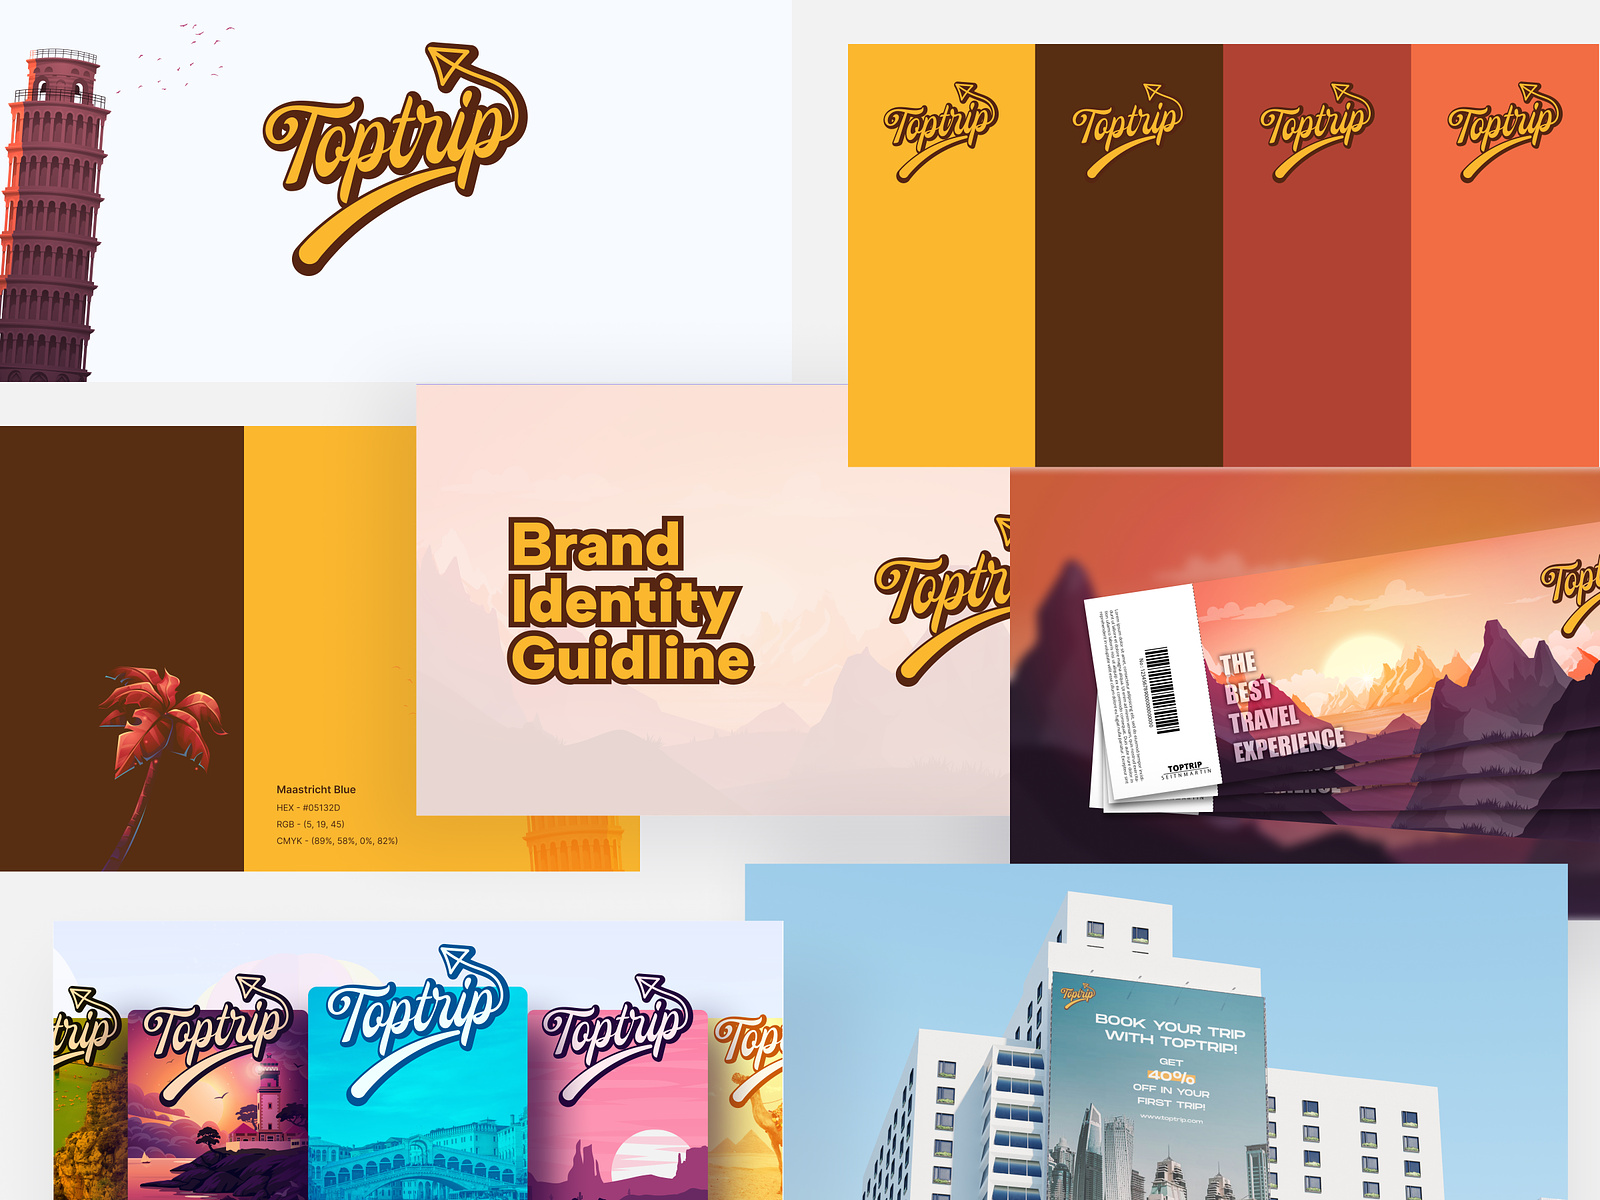 Toptrip Brand Identity Design by unbend on Dribbble